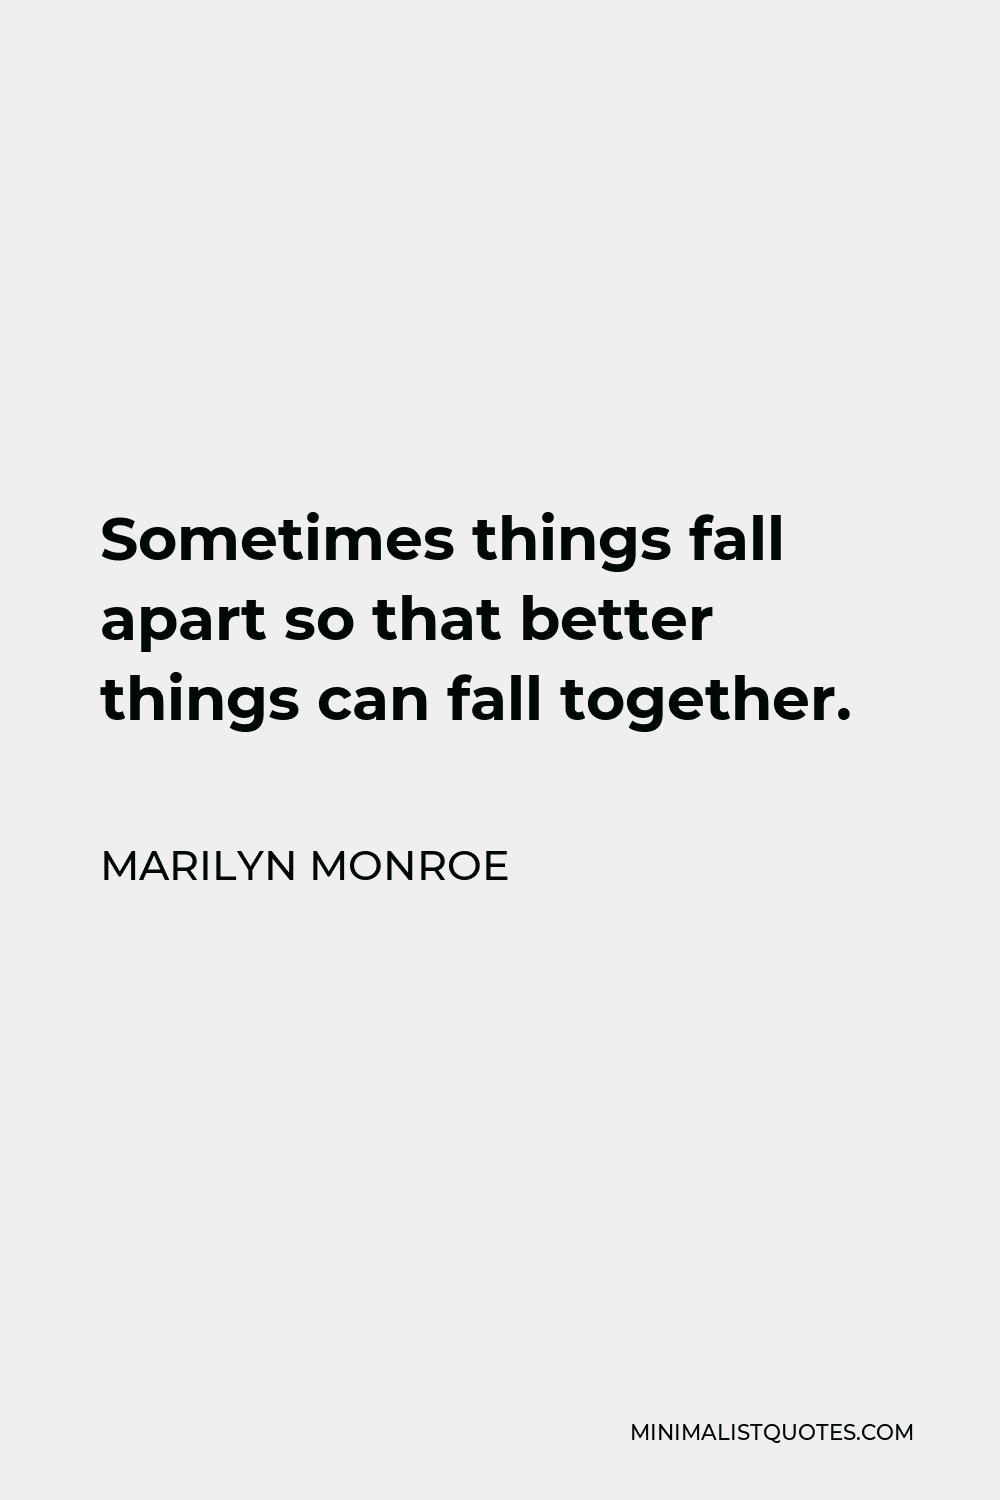 Marilyn Monroe Quote - Sometimes things fall apart so that better things can fall together.